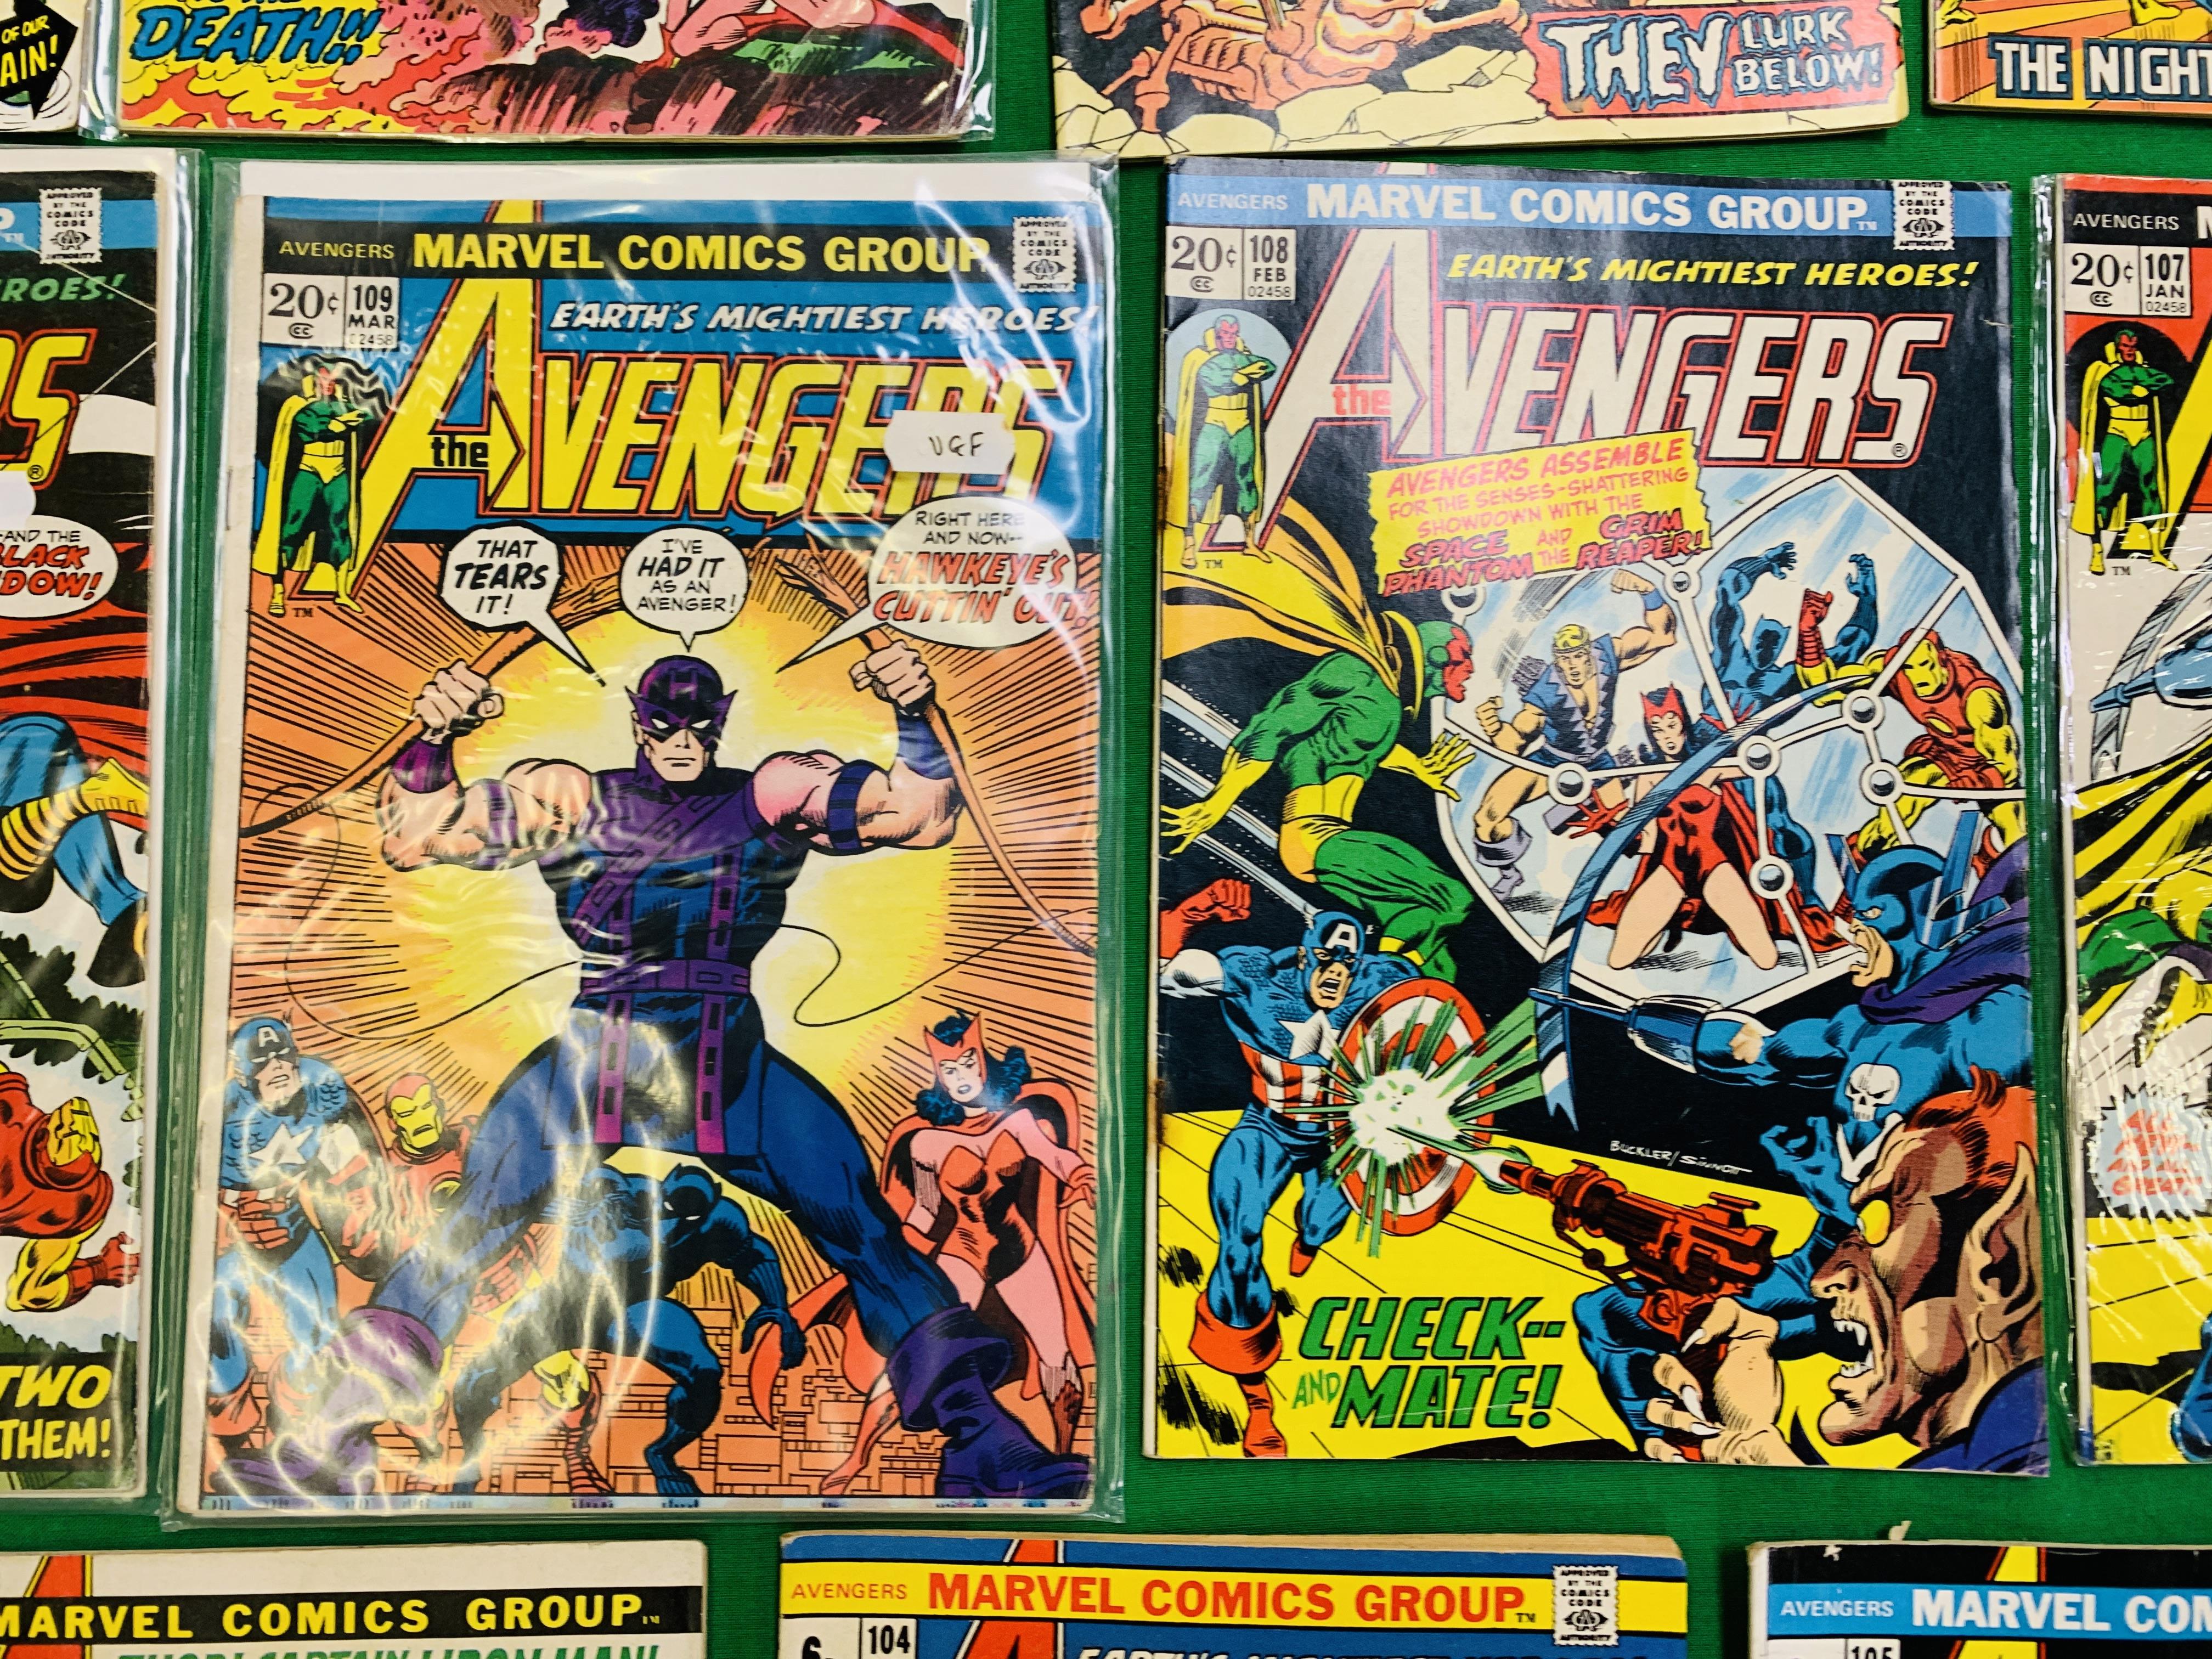 MARVEL COMICS THE AVENGERS NO. 101 - 299, MISSING ISSUES 103 AND 110. - Image 5 of 130